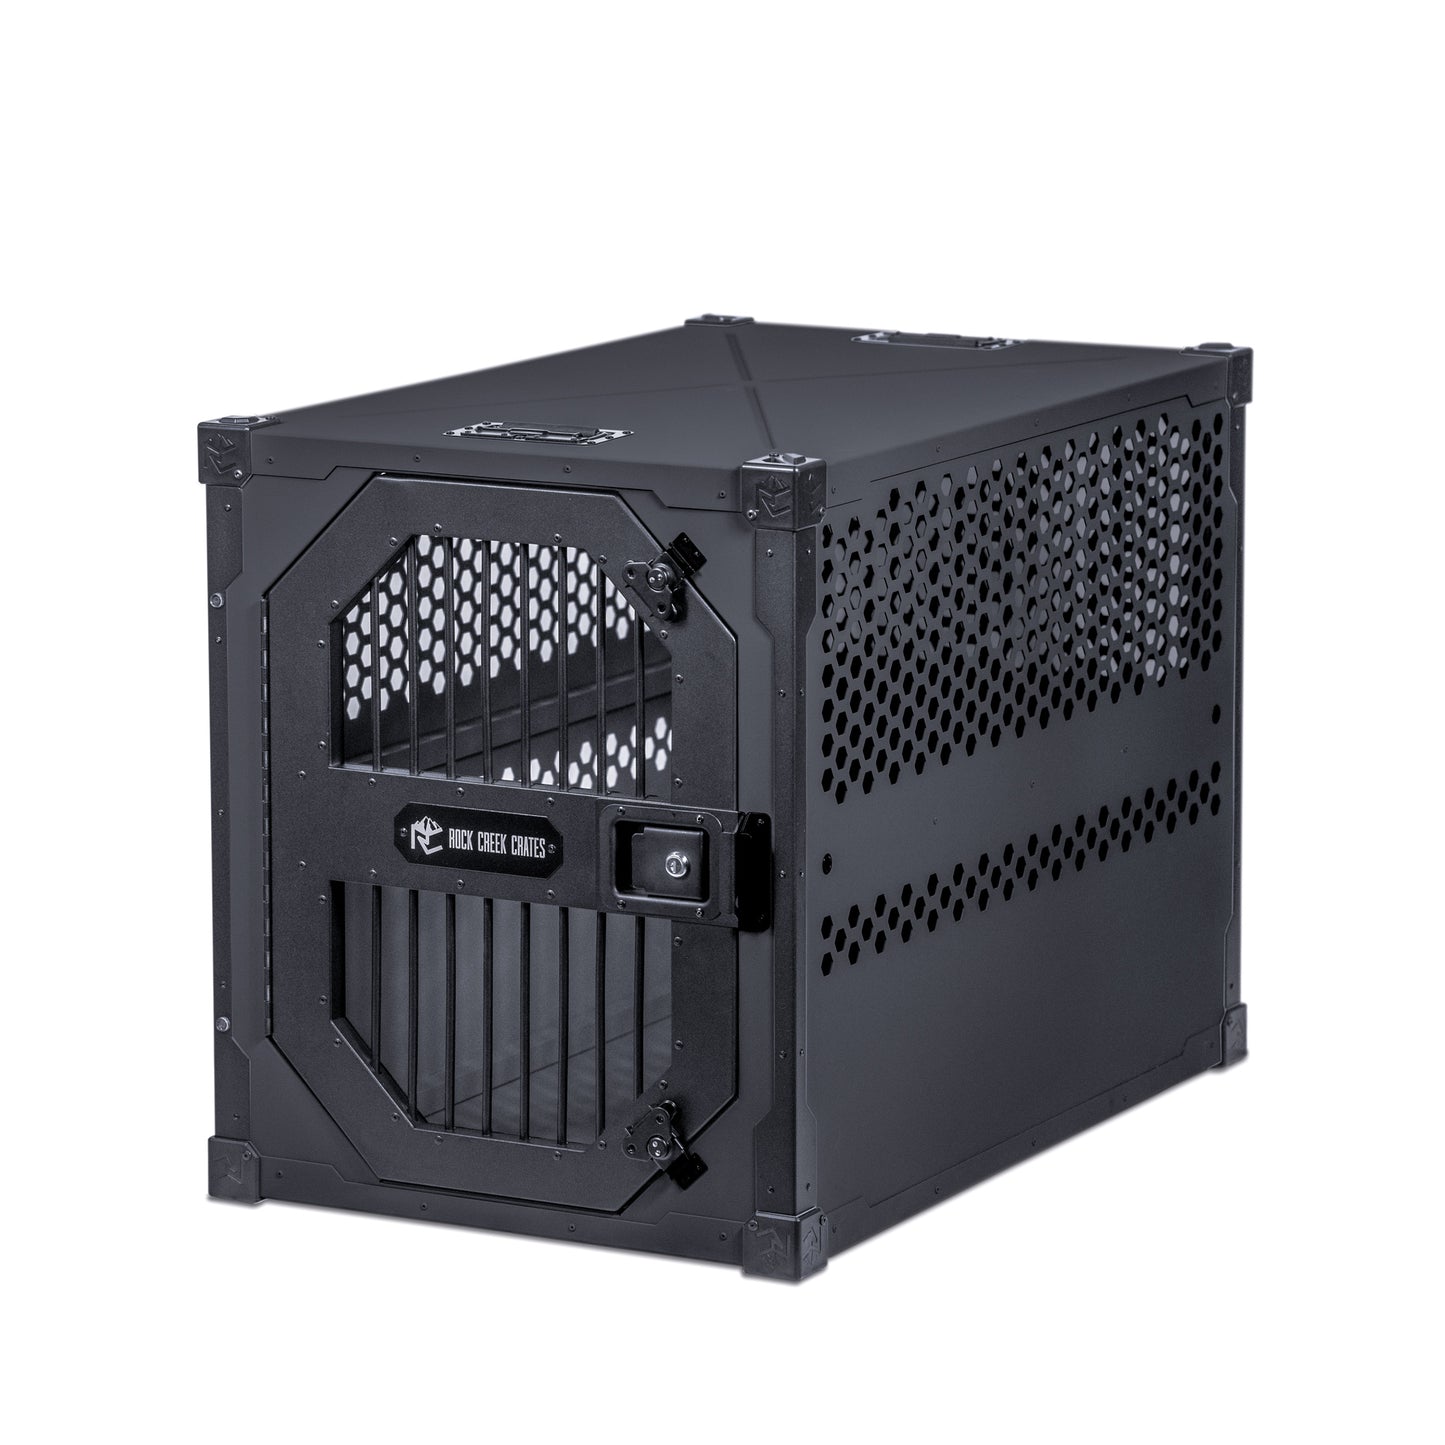 Midnight Black Stationary dog crate by Rock Creek Crates